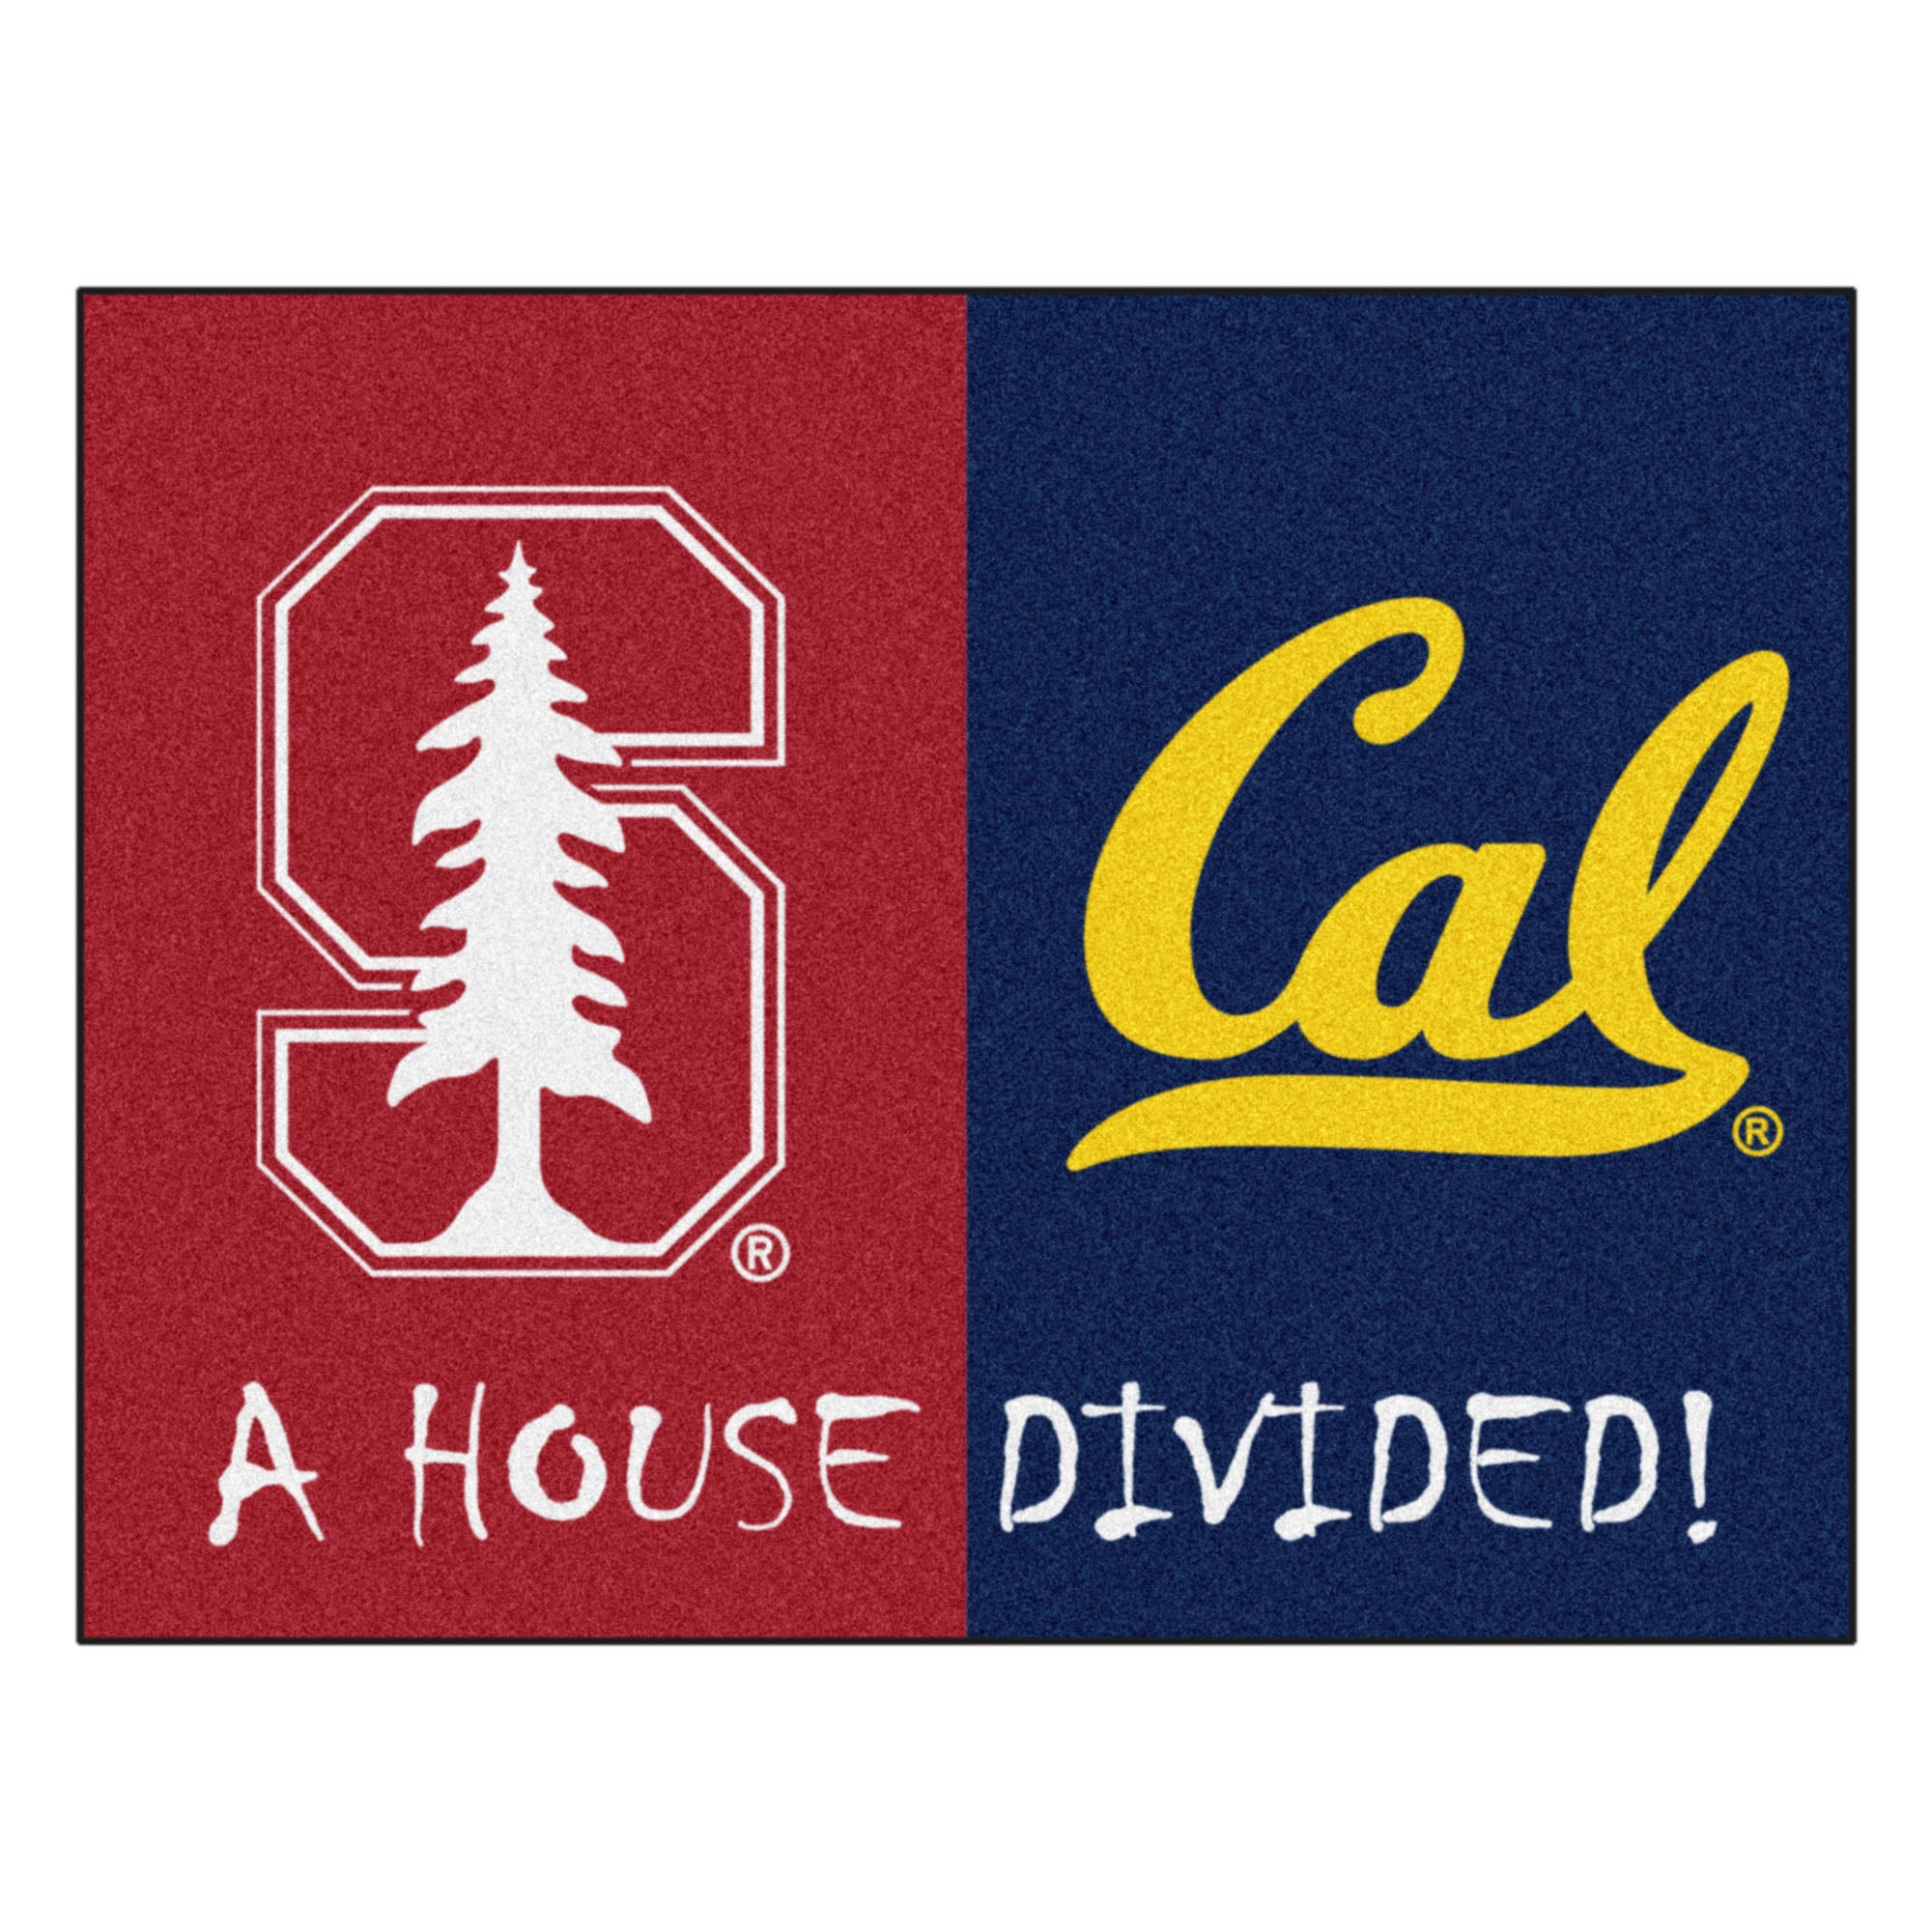 Fanmat - House divided - stanford / uc-berkeley house divided mat